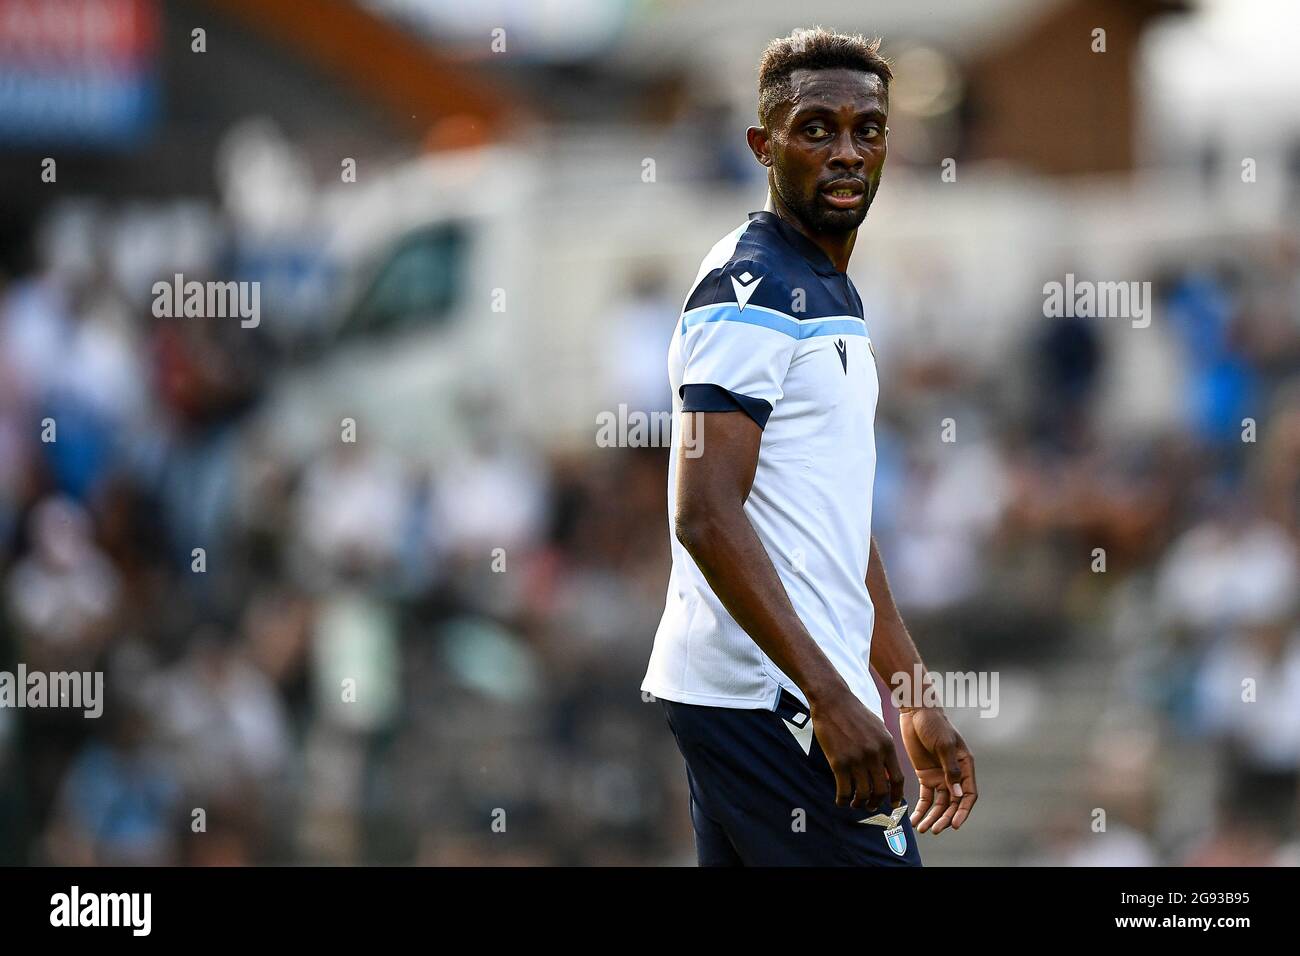 Auronzo di Cadore, Italy. 23 July 2021. Jean-Daniel Akpa-Akpro of SS Lazio  looks on during the pre-season friendly football match between SS Lazio and  US Triestina. SS Lazion won 5-2 over US